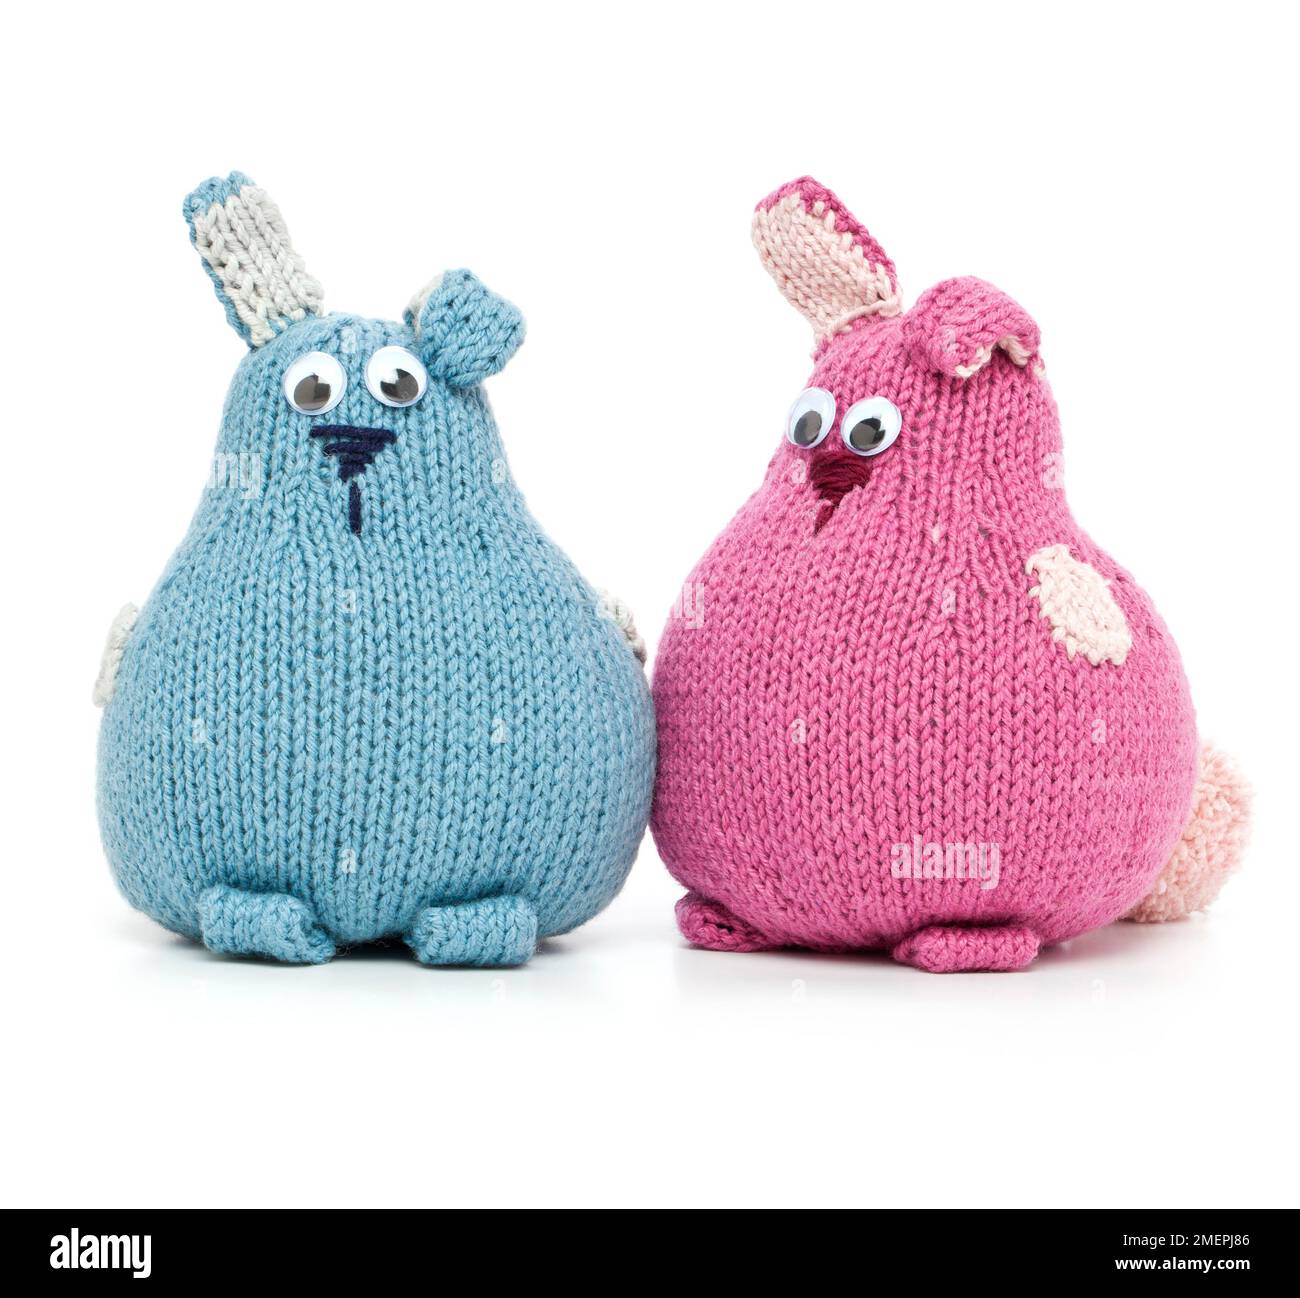 Knitted blue and pink wool cotton bunny rabbit toys, close-up Stock Photo